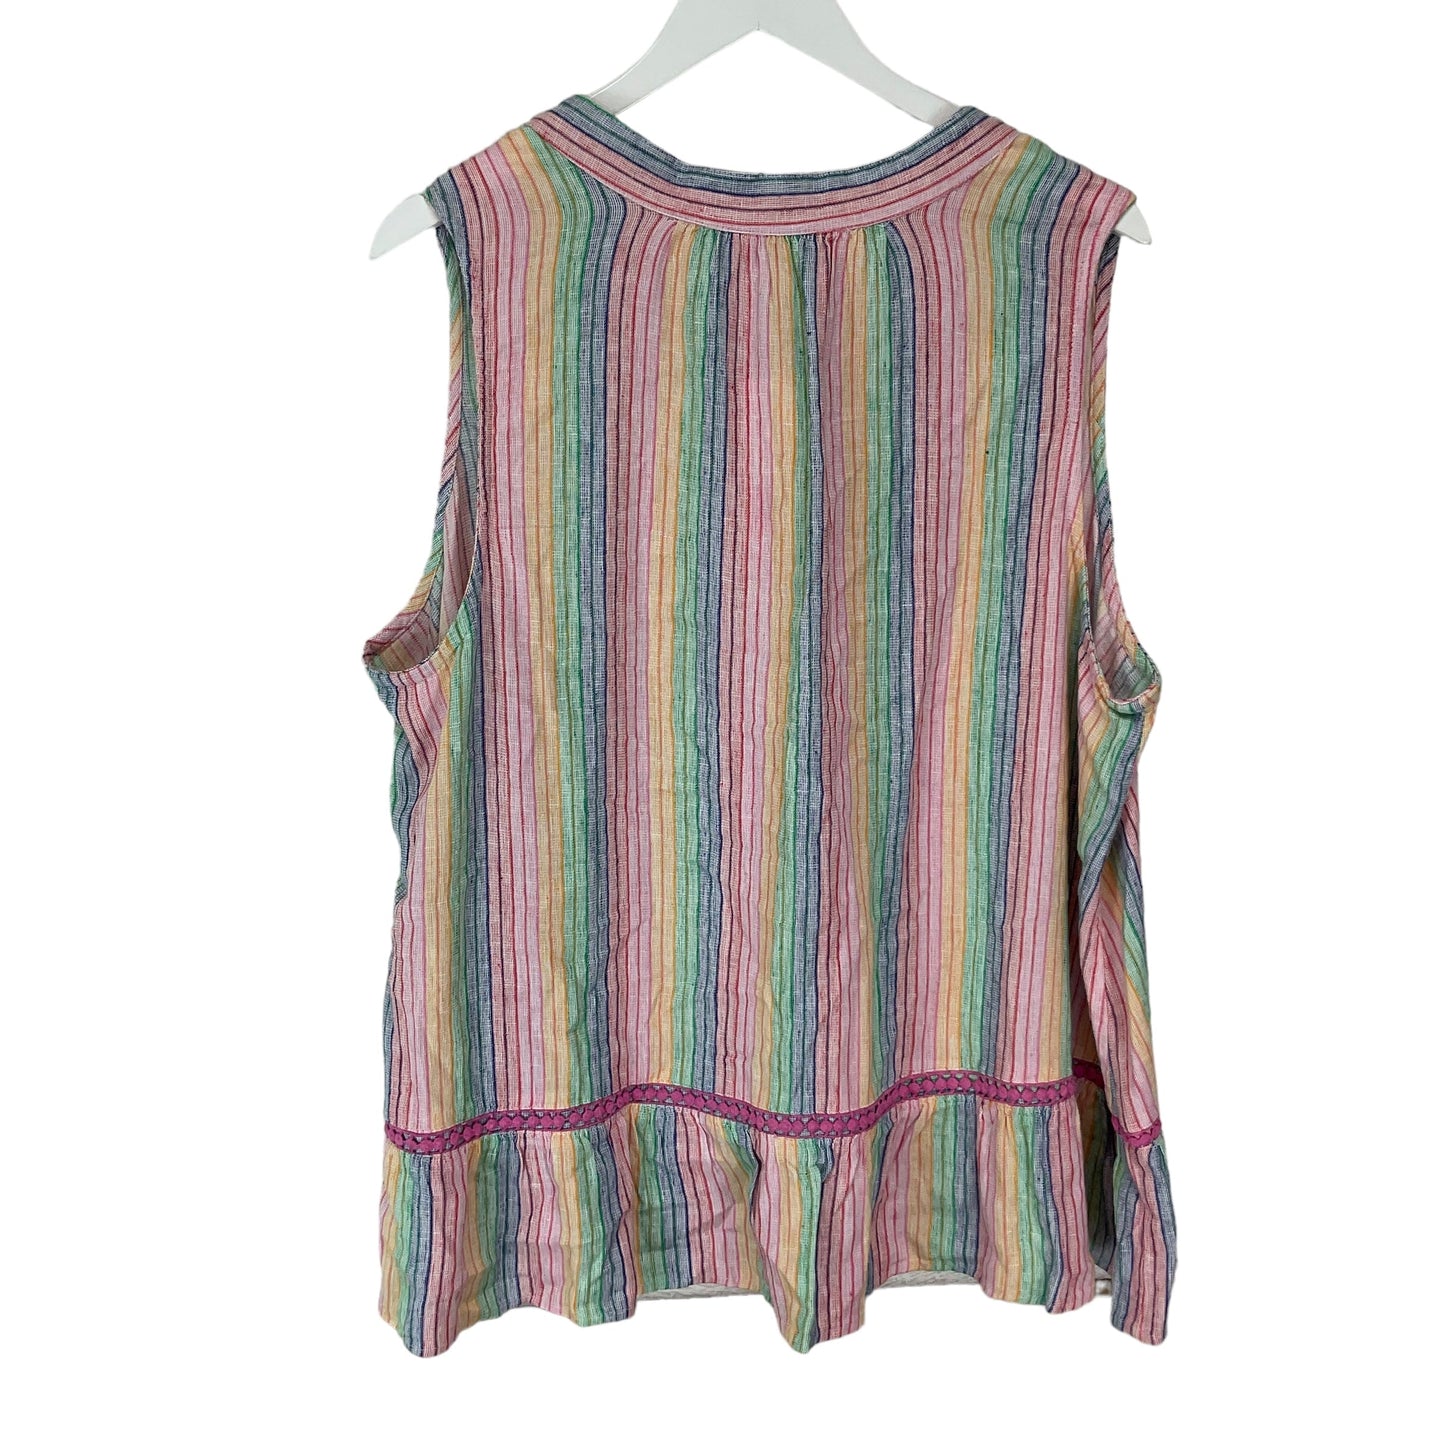 Striped Pattern Top Sleeveless Crown And Ivy, Size Xxl